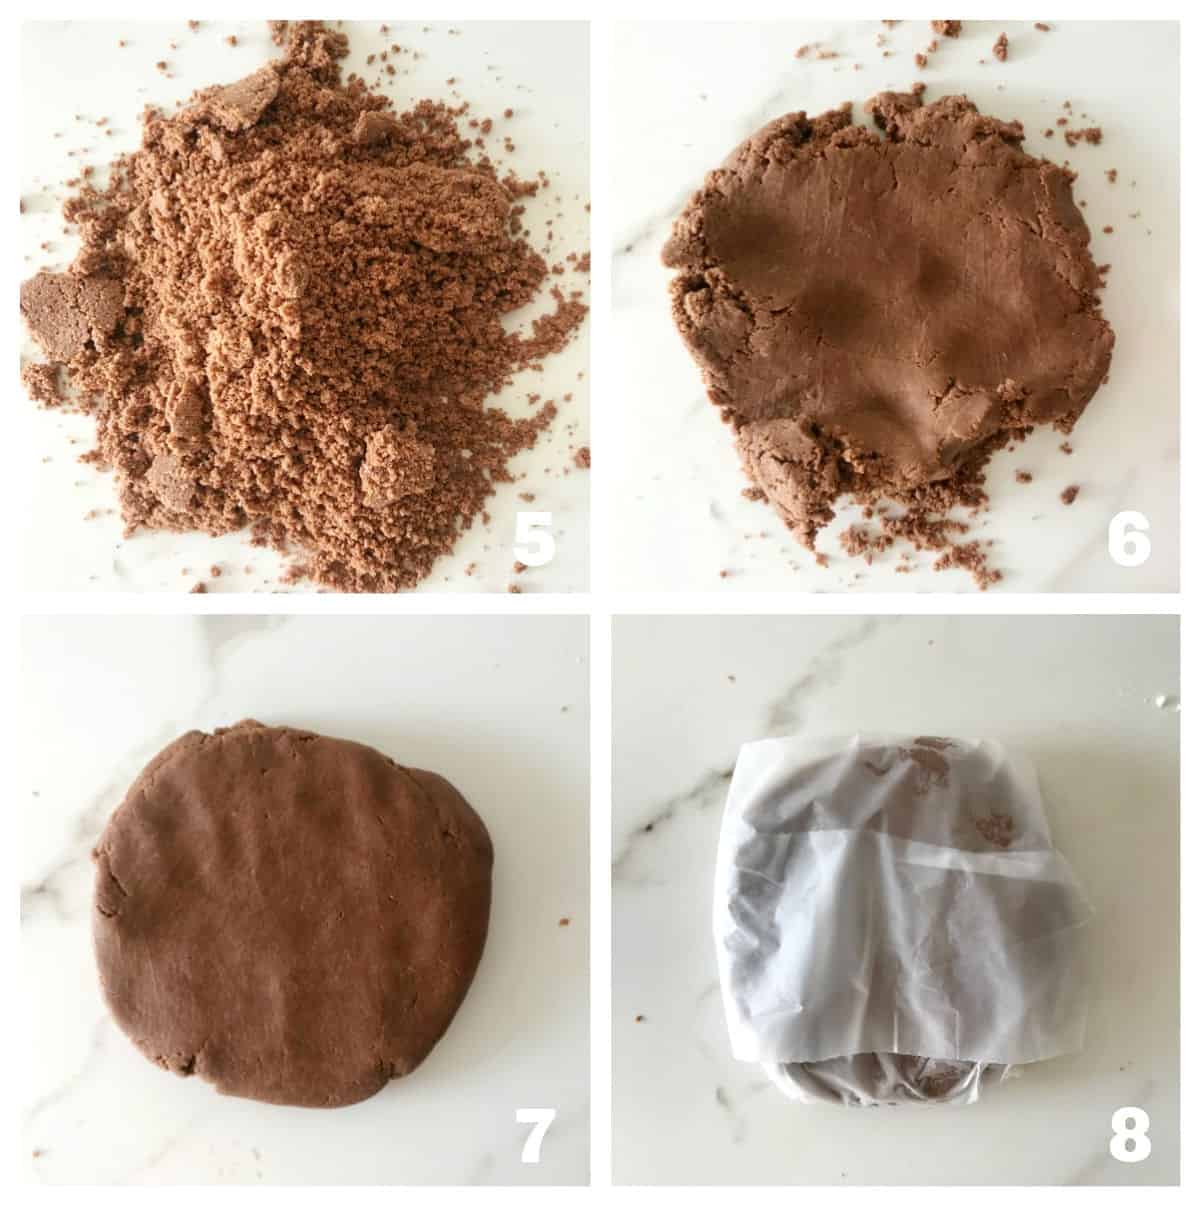 Four images showing steps for gathering ball of chocolate dough on a white marbled surface.